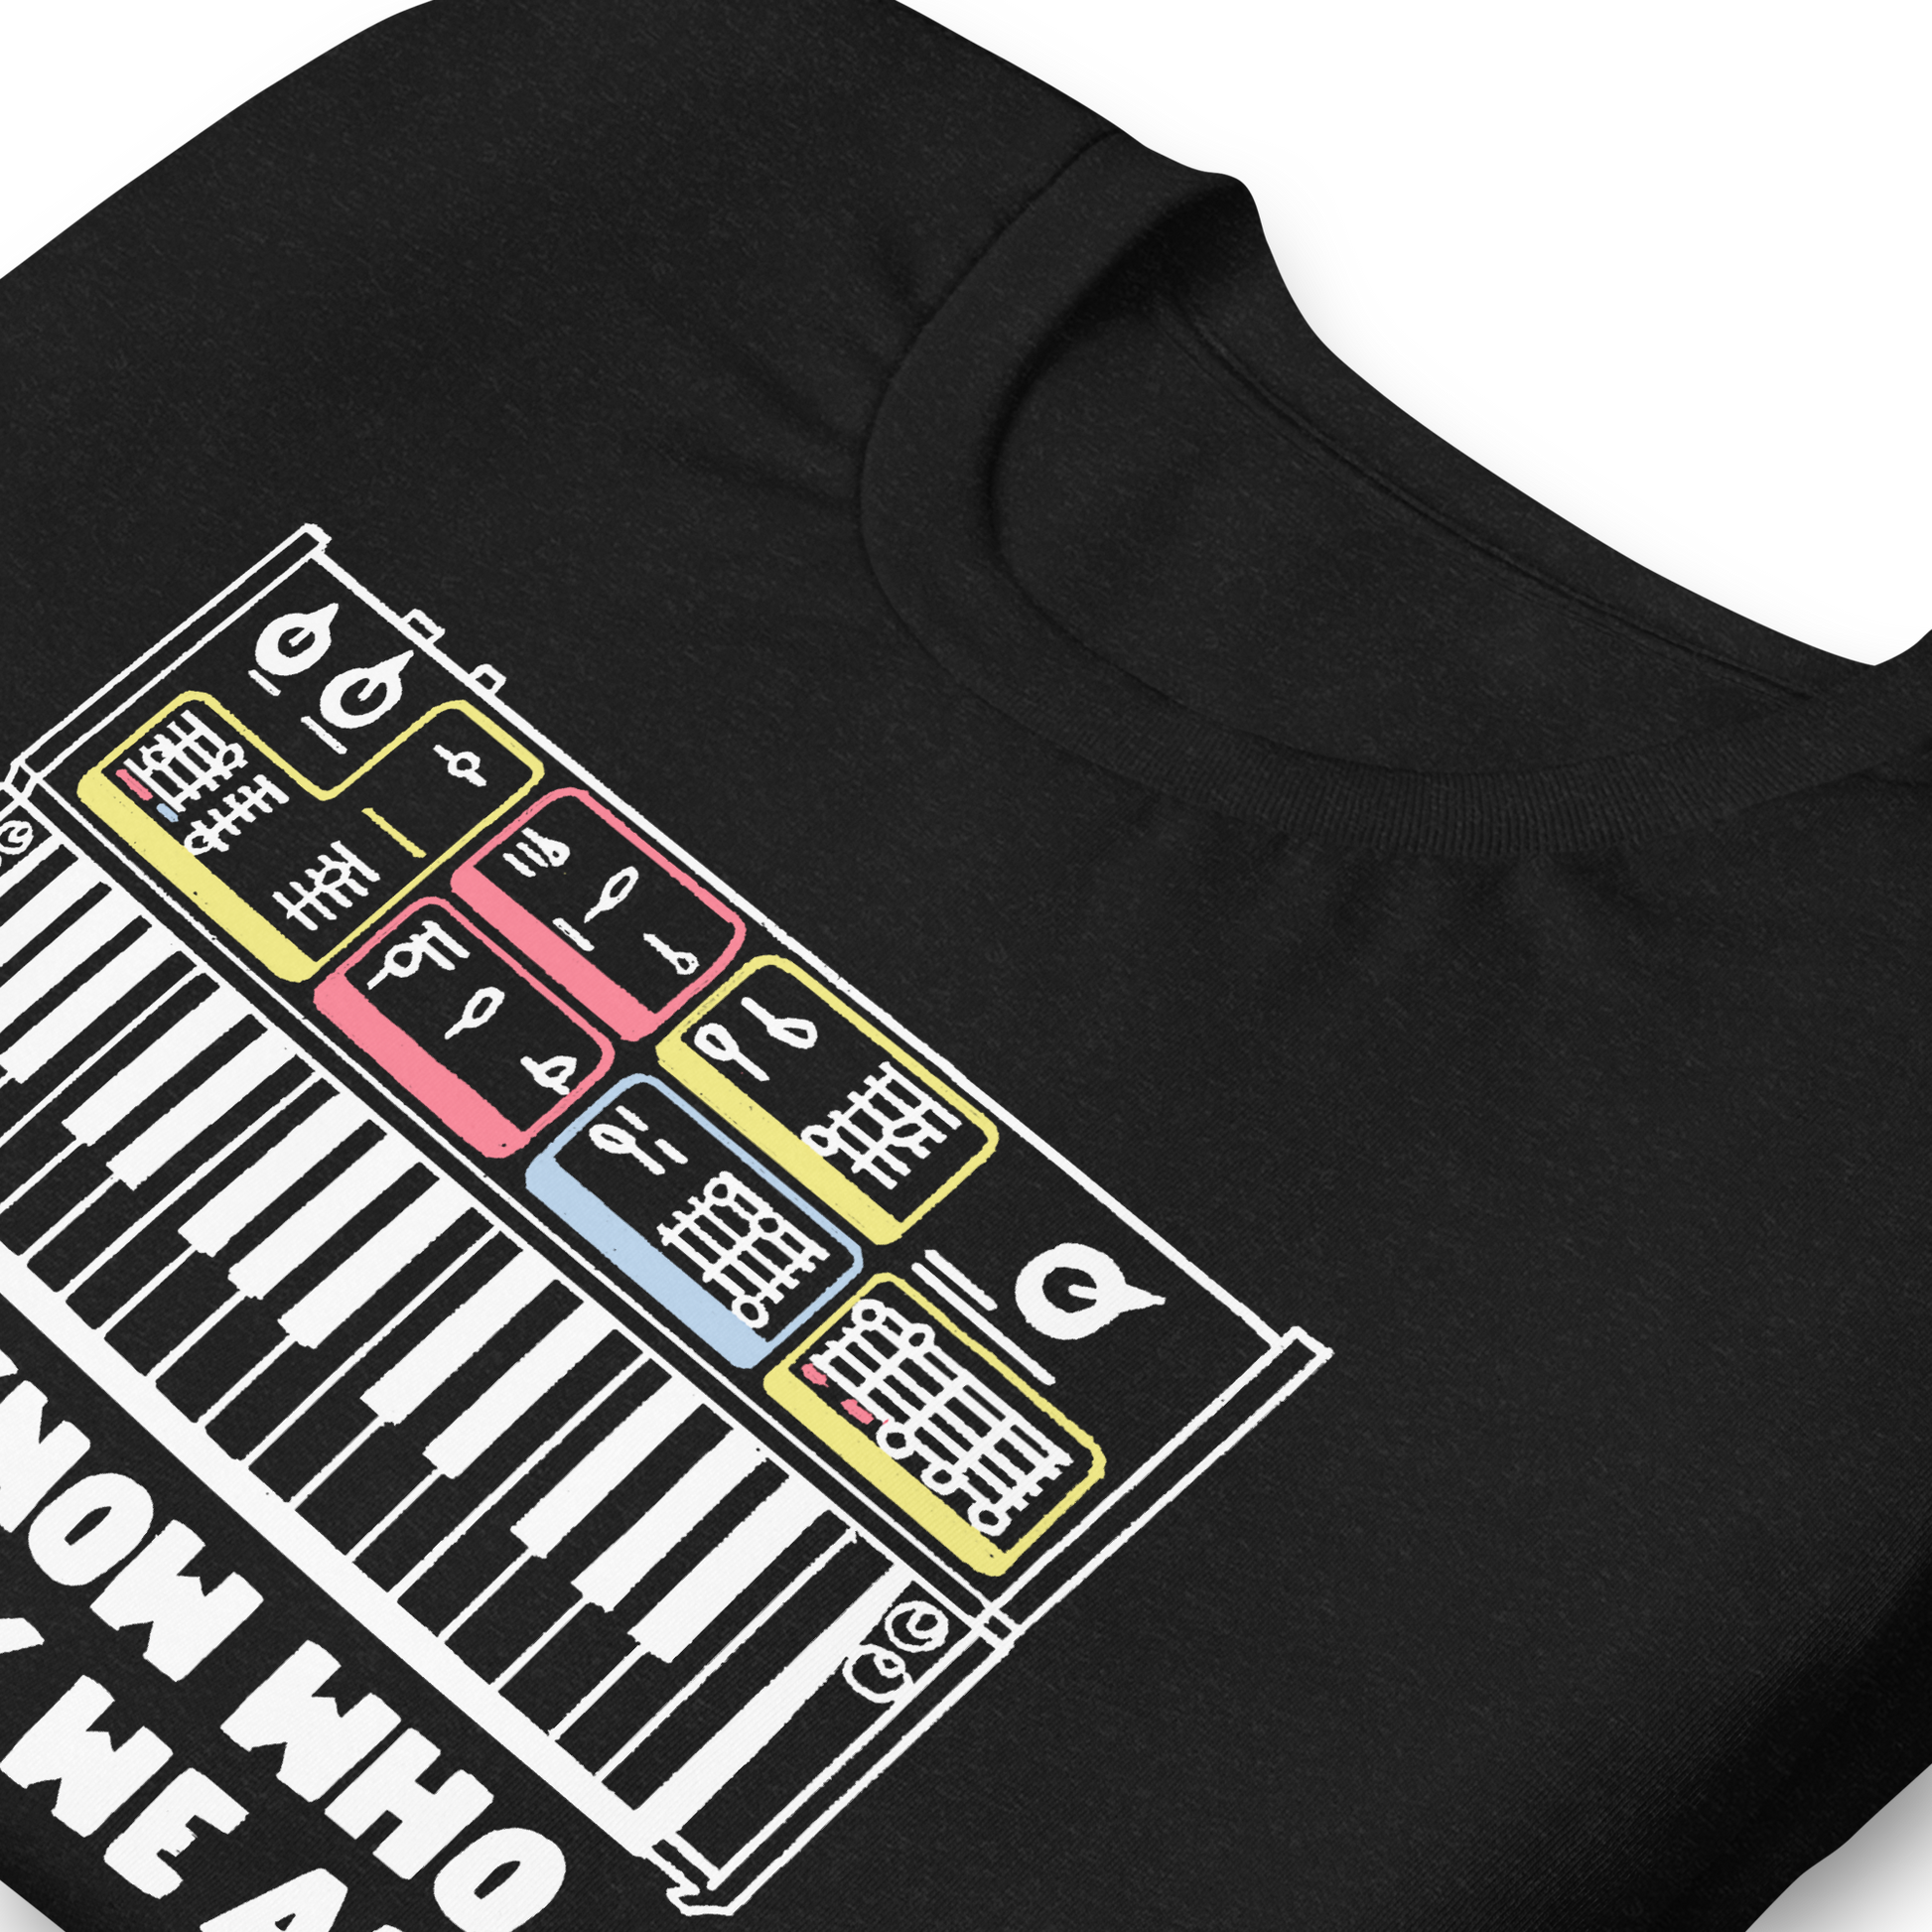 You Know Who Tee front with synth detail